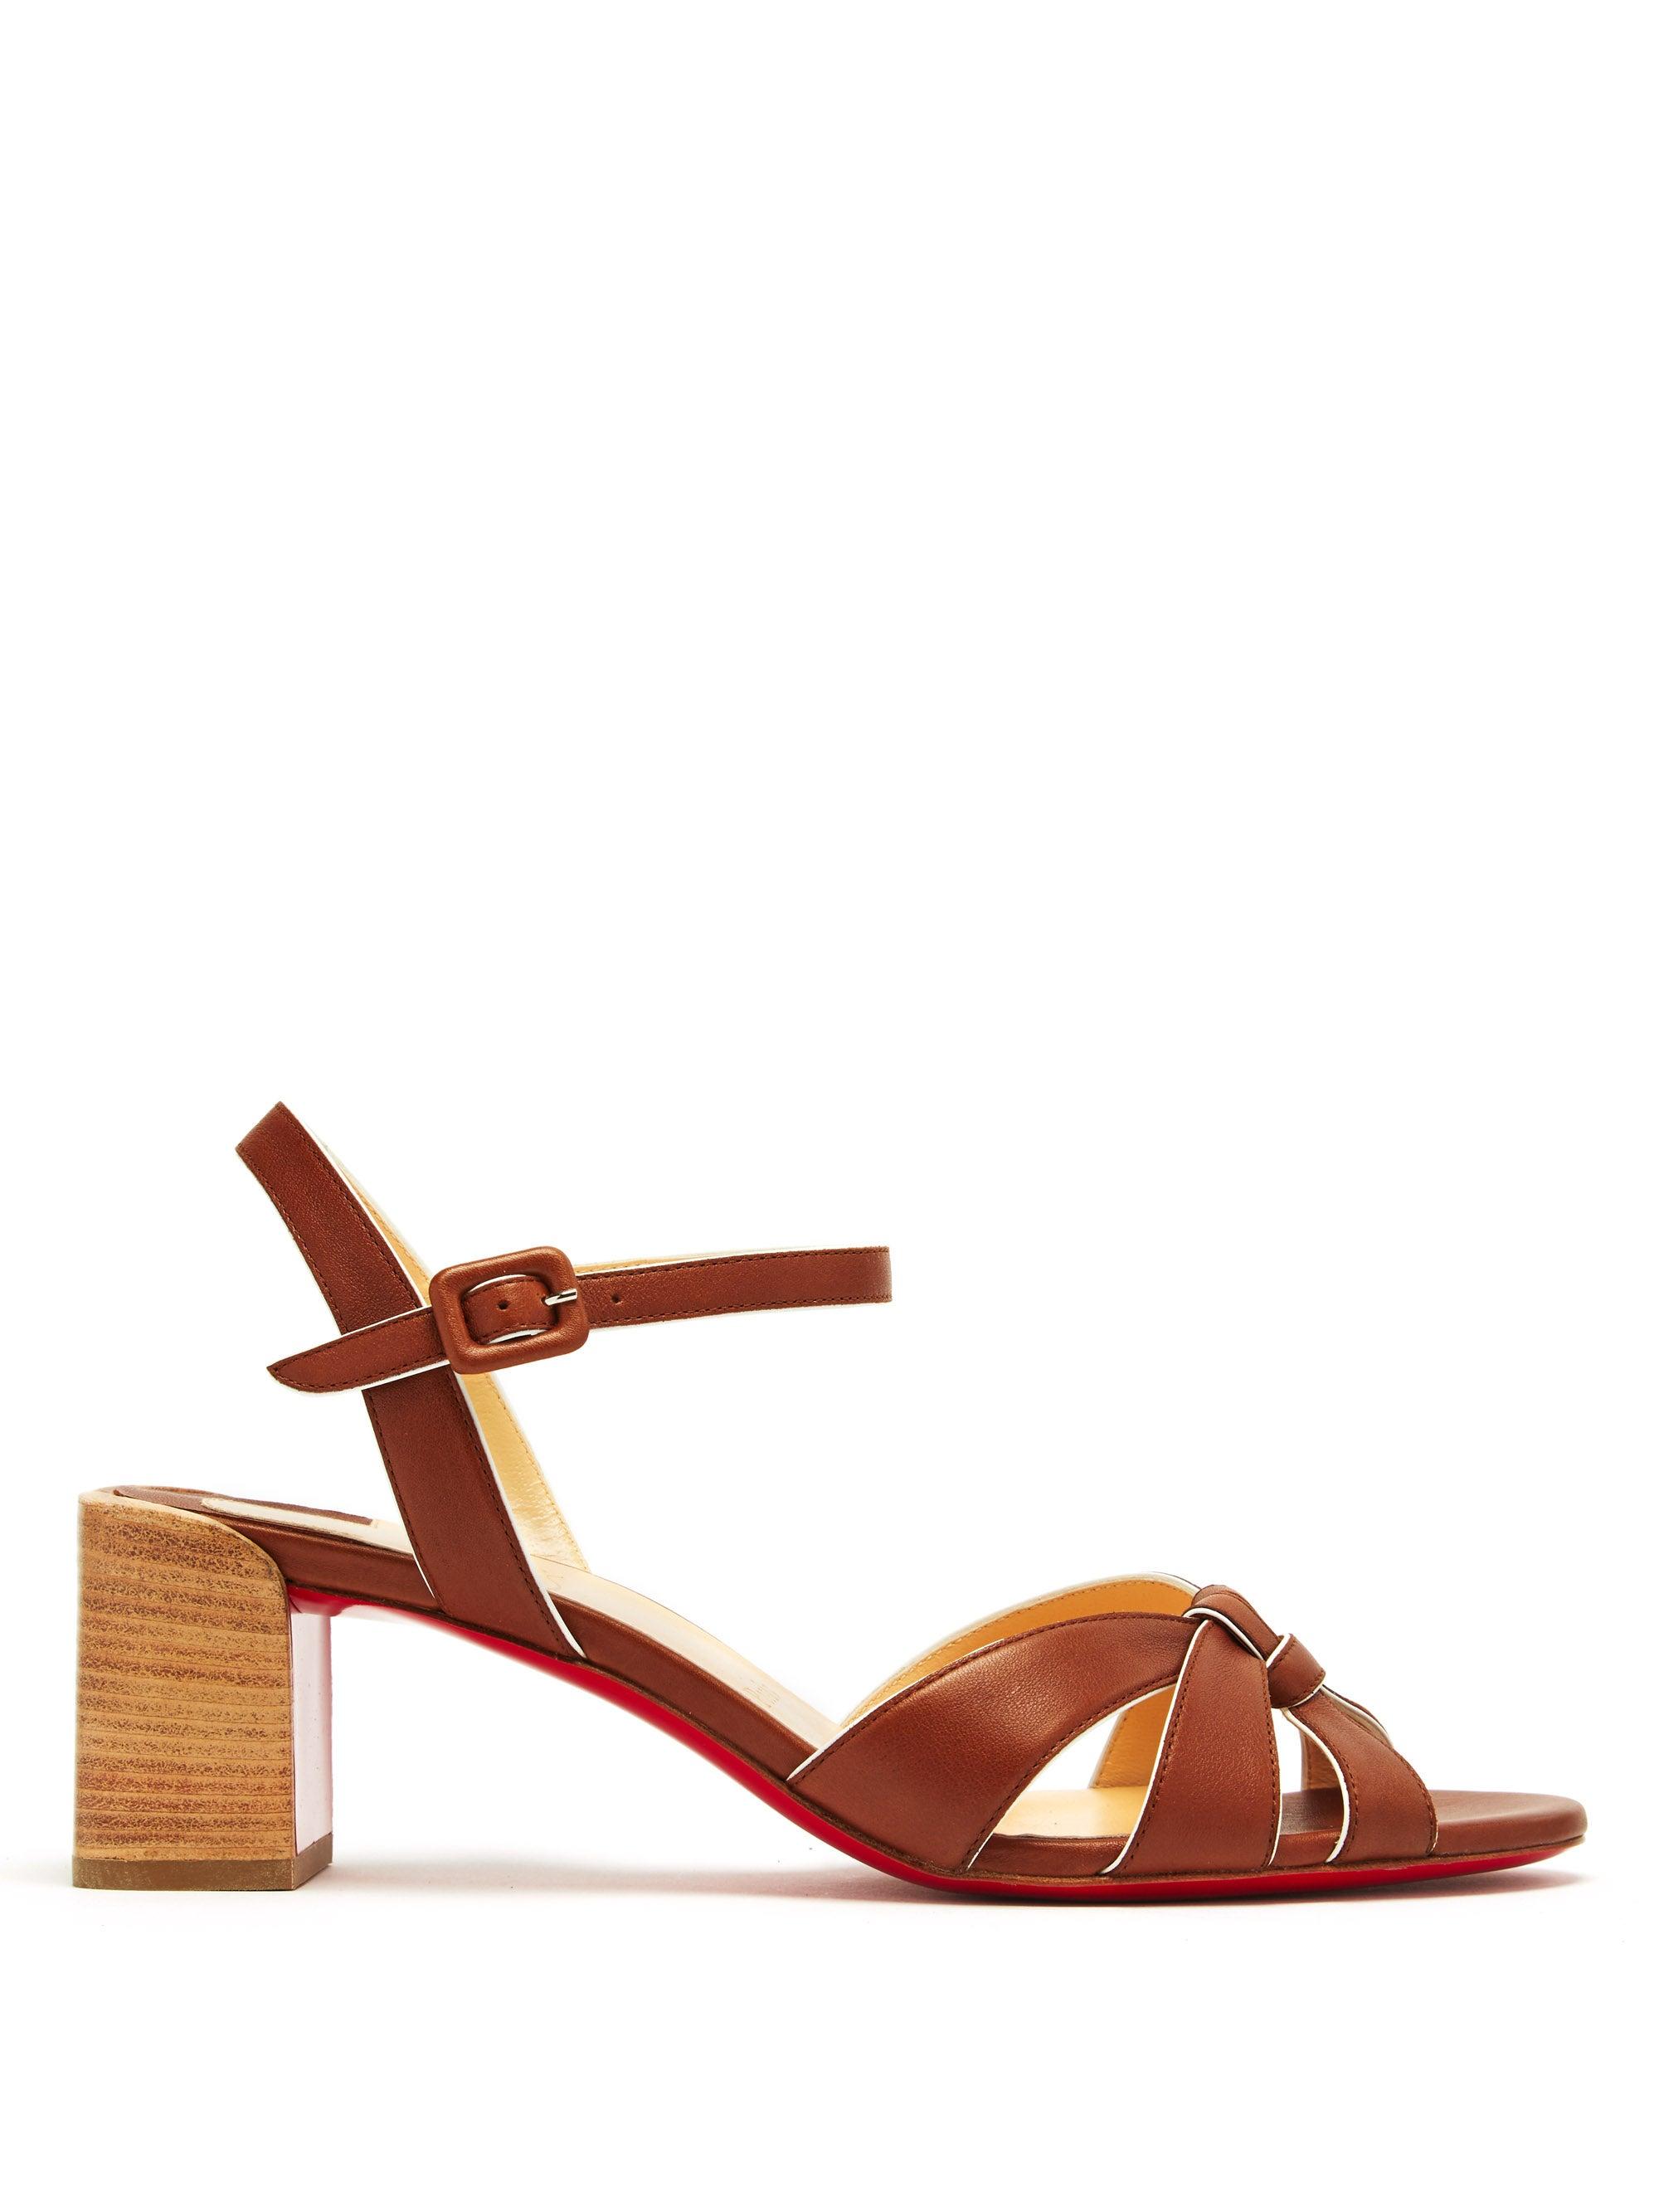 Christian Louboutin Anjalili 55 Leather Sandals in Tan (Brown) | Lyst